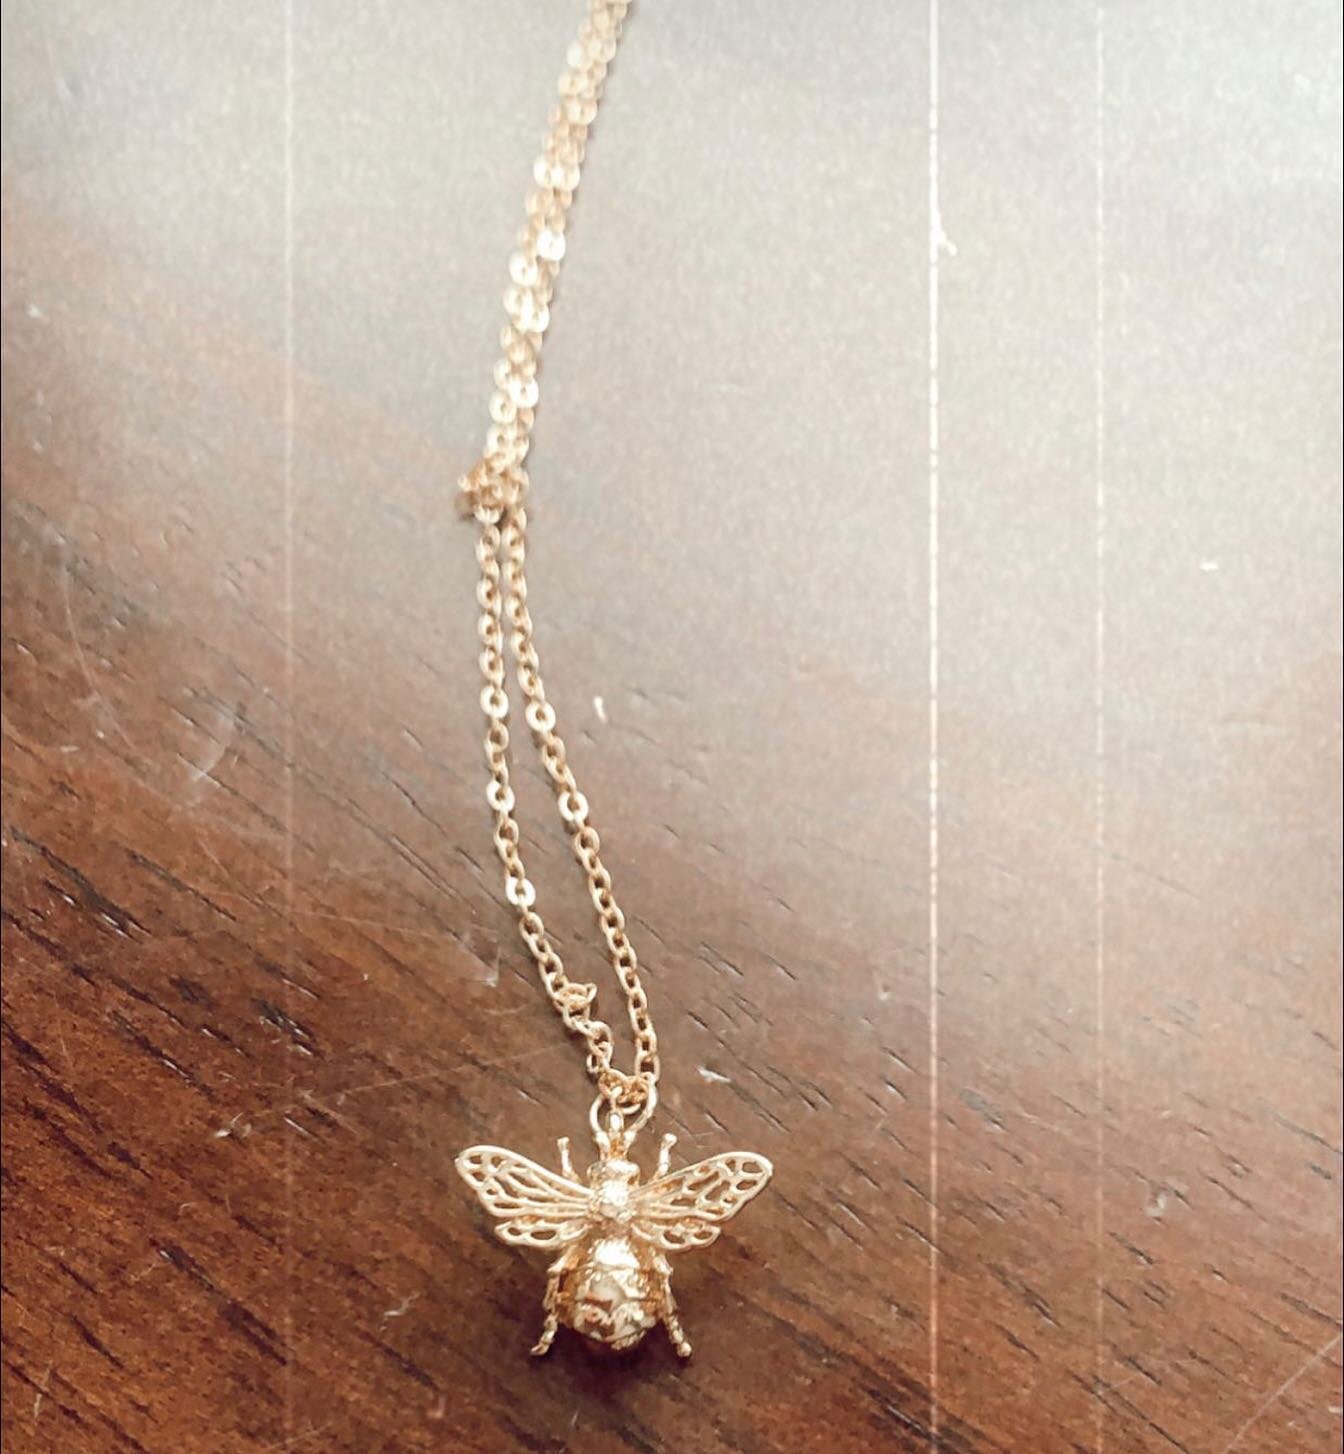 Hey 🍯 honey, this little 🐝 bee-autiful piece is now available! Link in bio to shop this necklace.